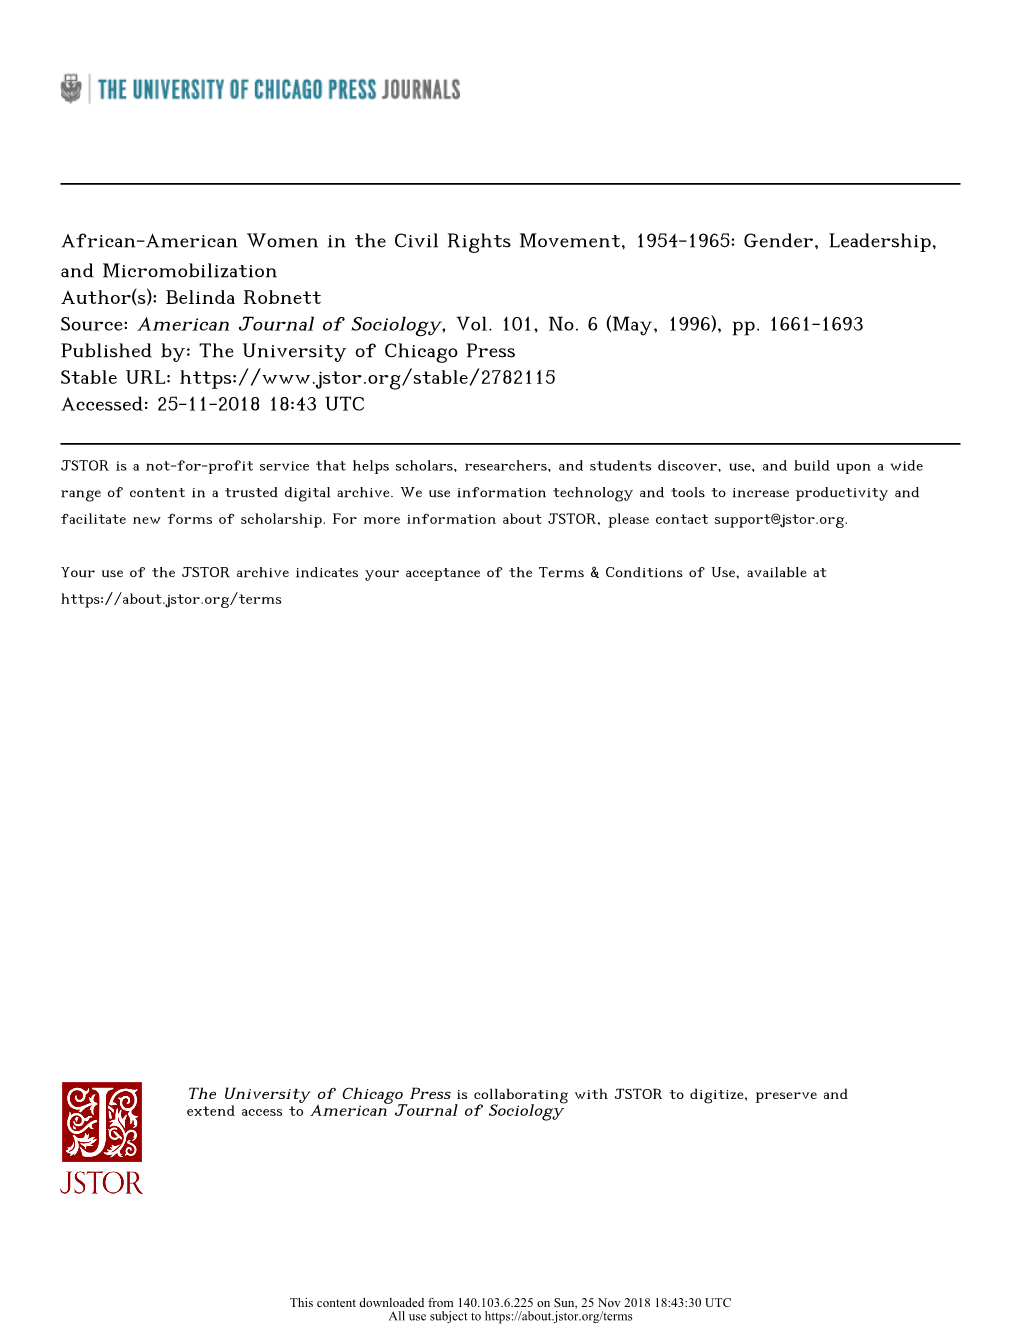 African-American Women in the Civil Rights Movement, 1954-1965